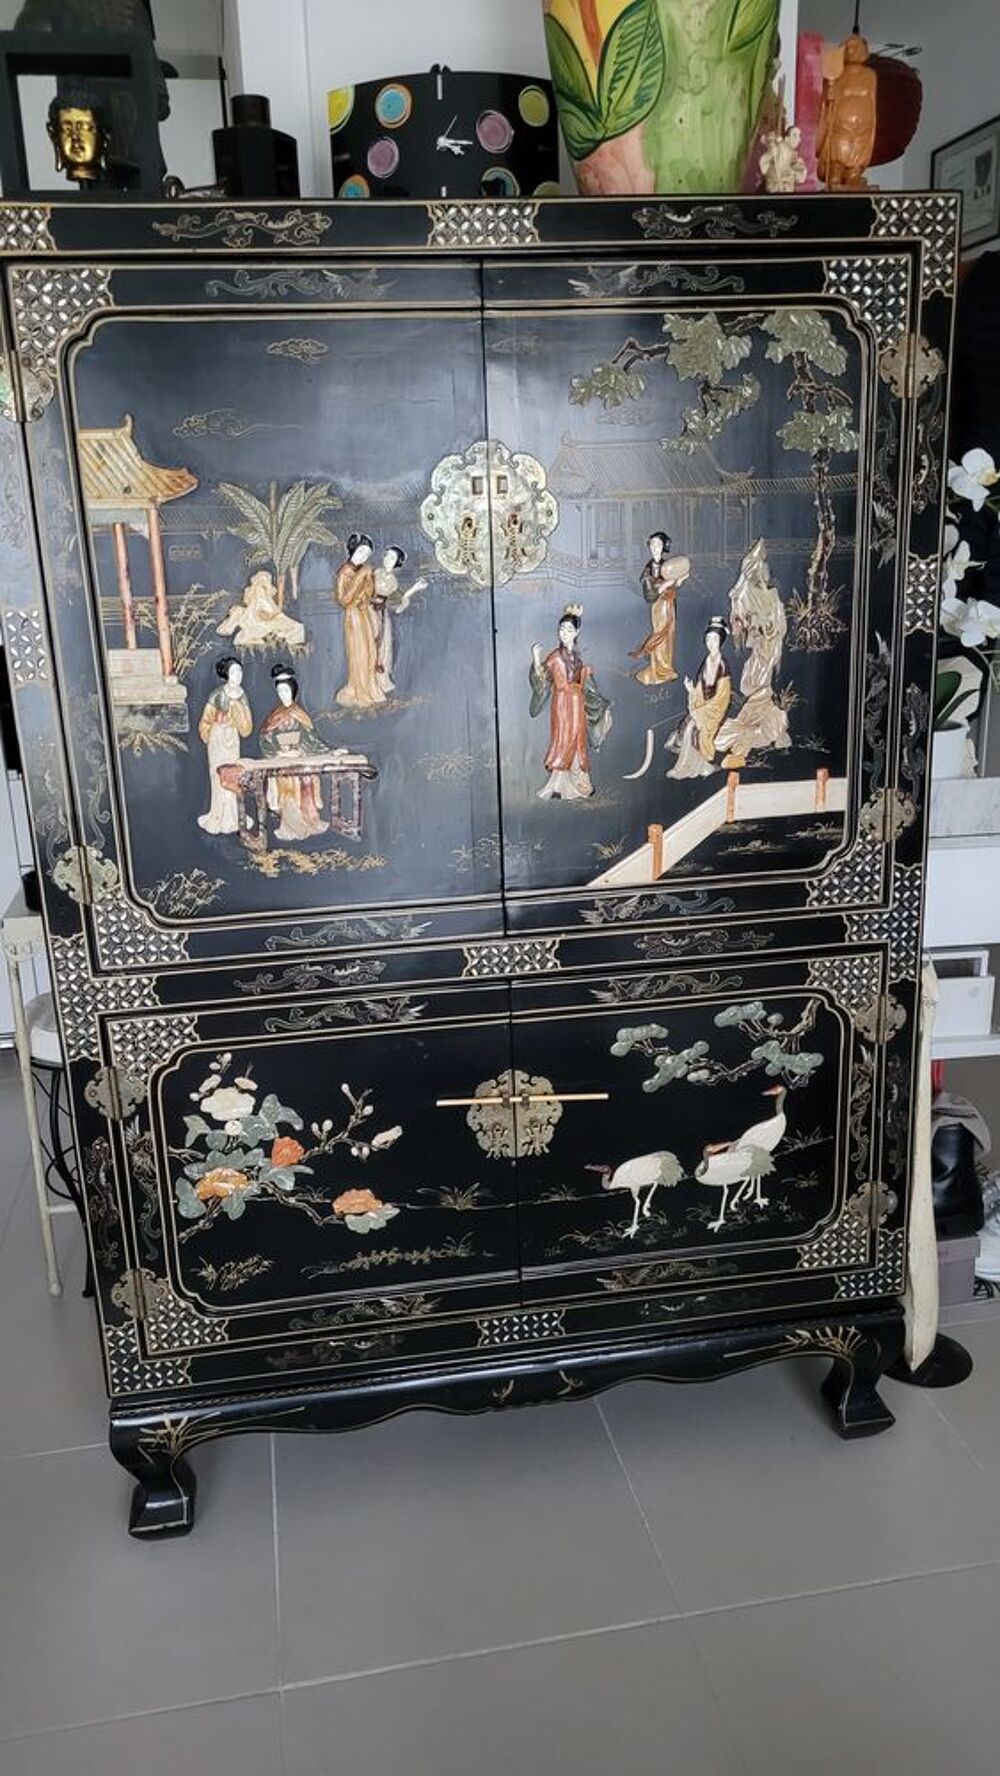 Meubles chinois
Table basse chinoise Meubles